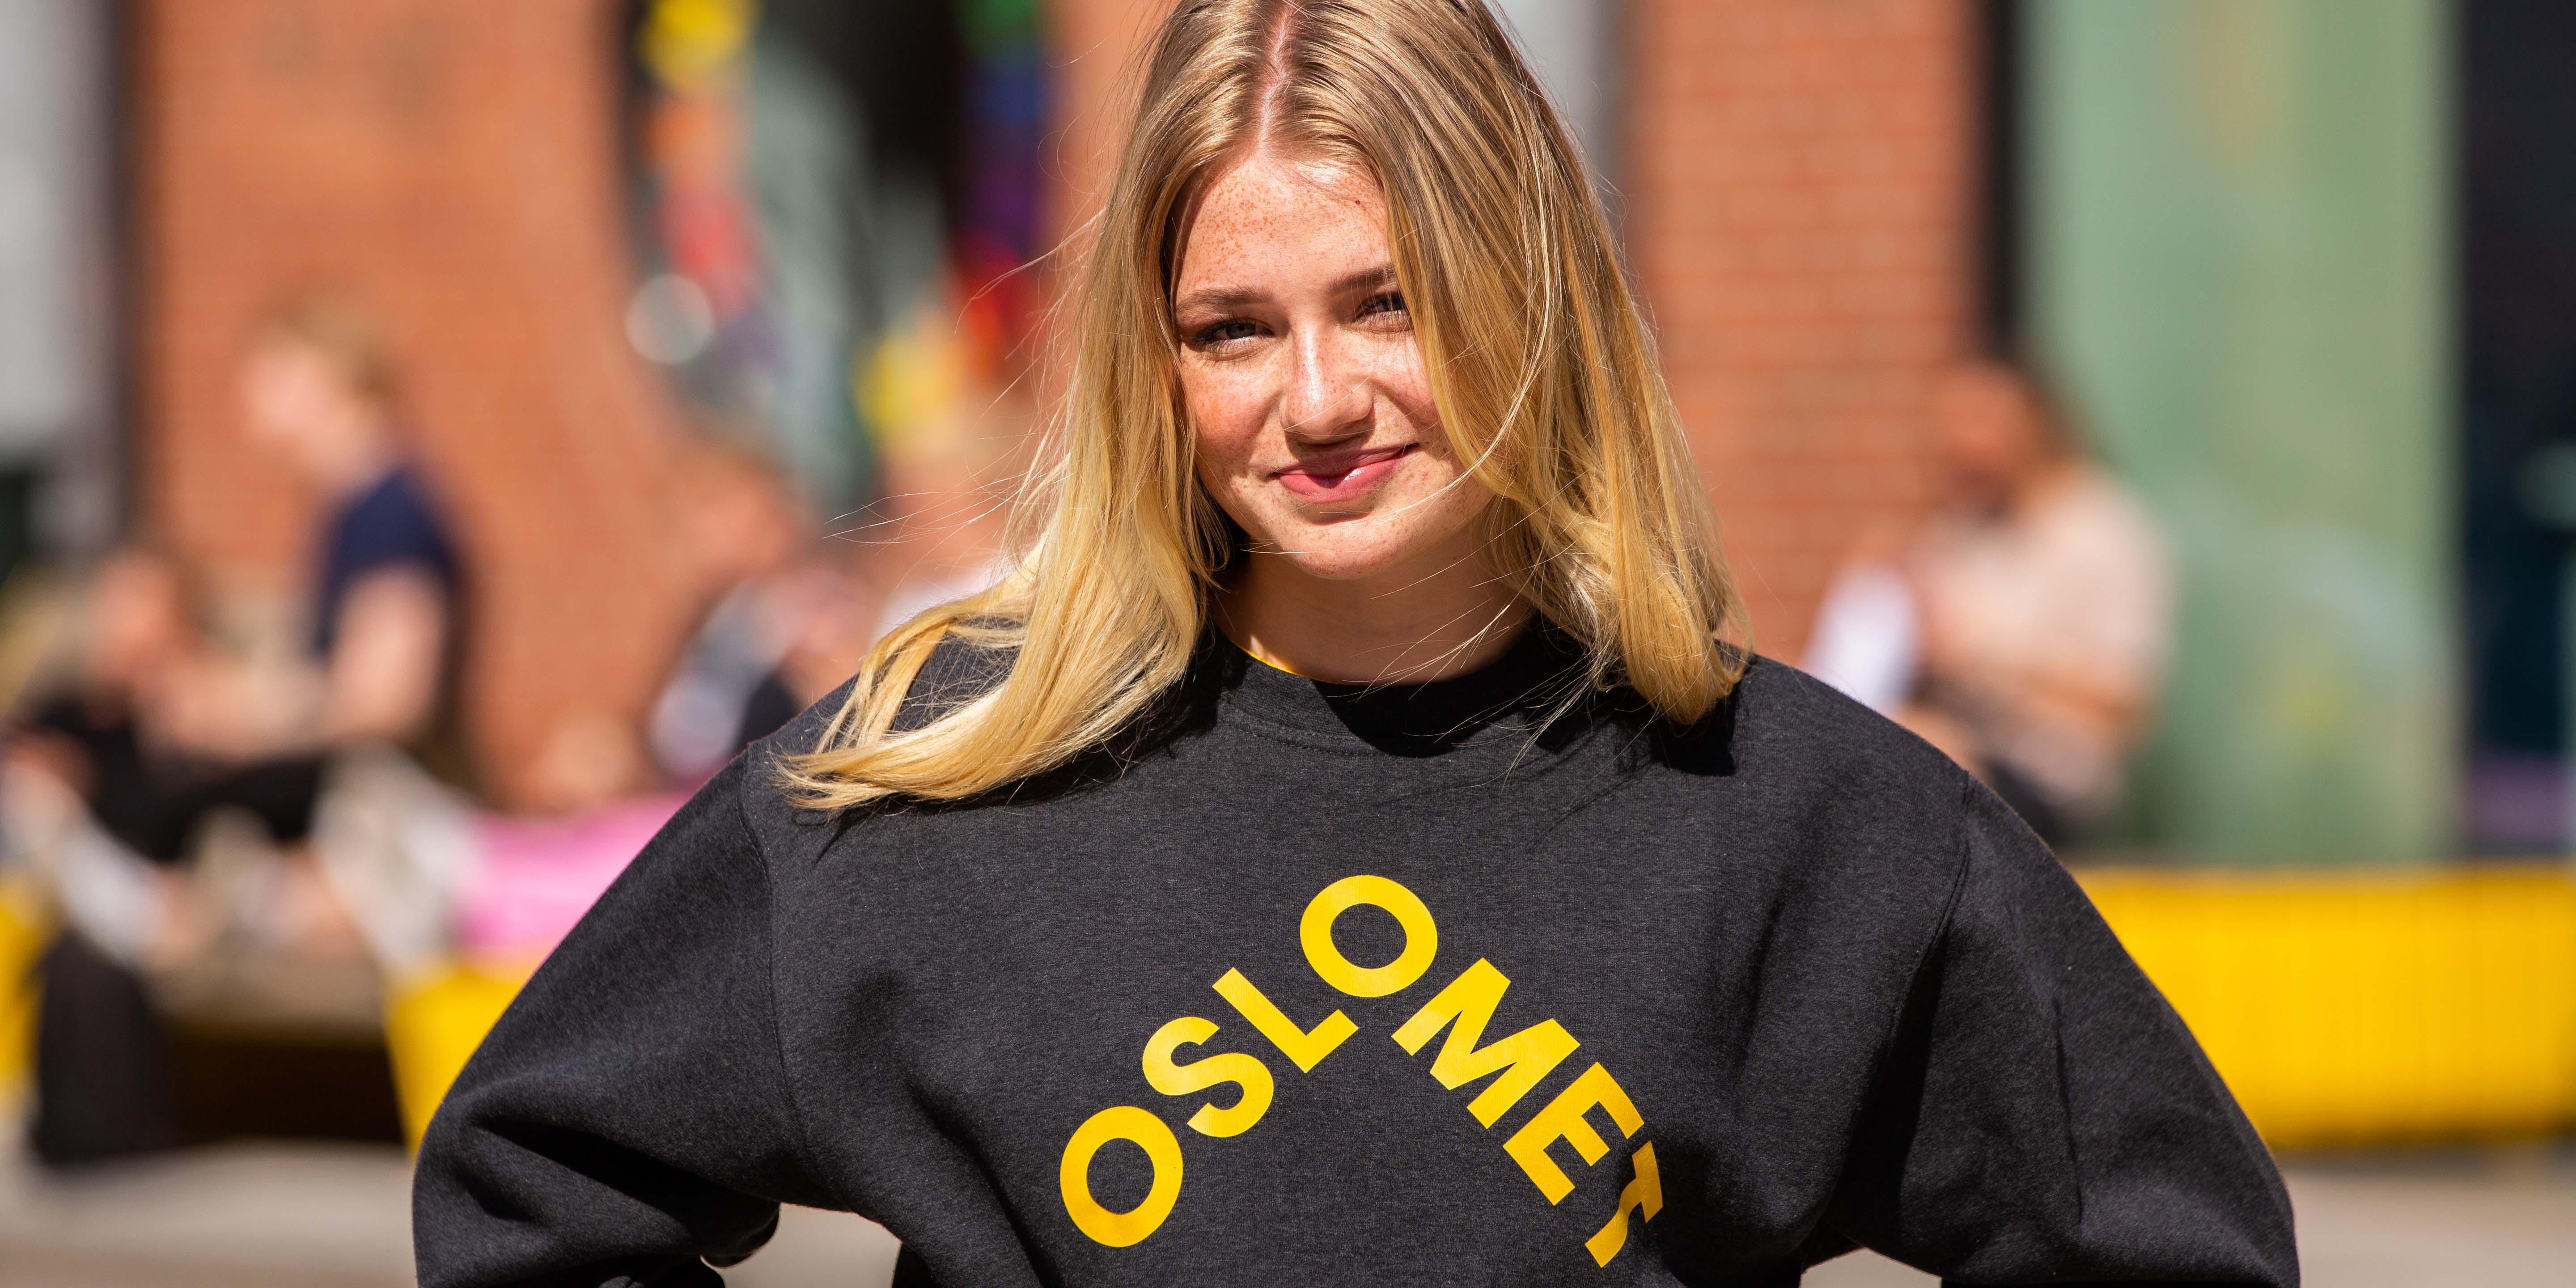 A student with blond hair wearing a grey college jumper with a big yellow OsloMet logo in the front